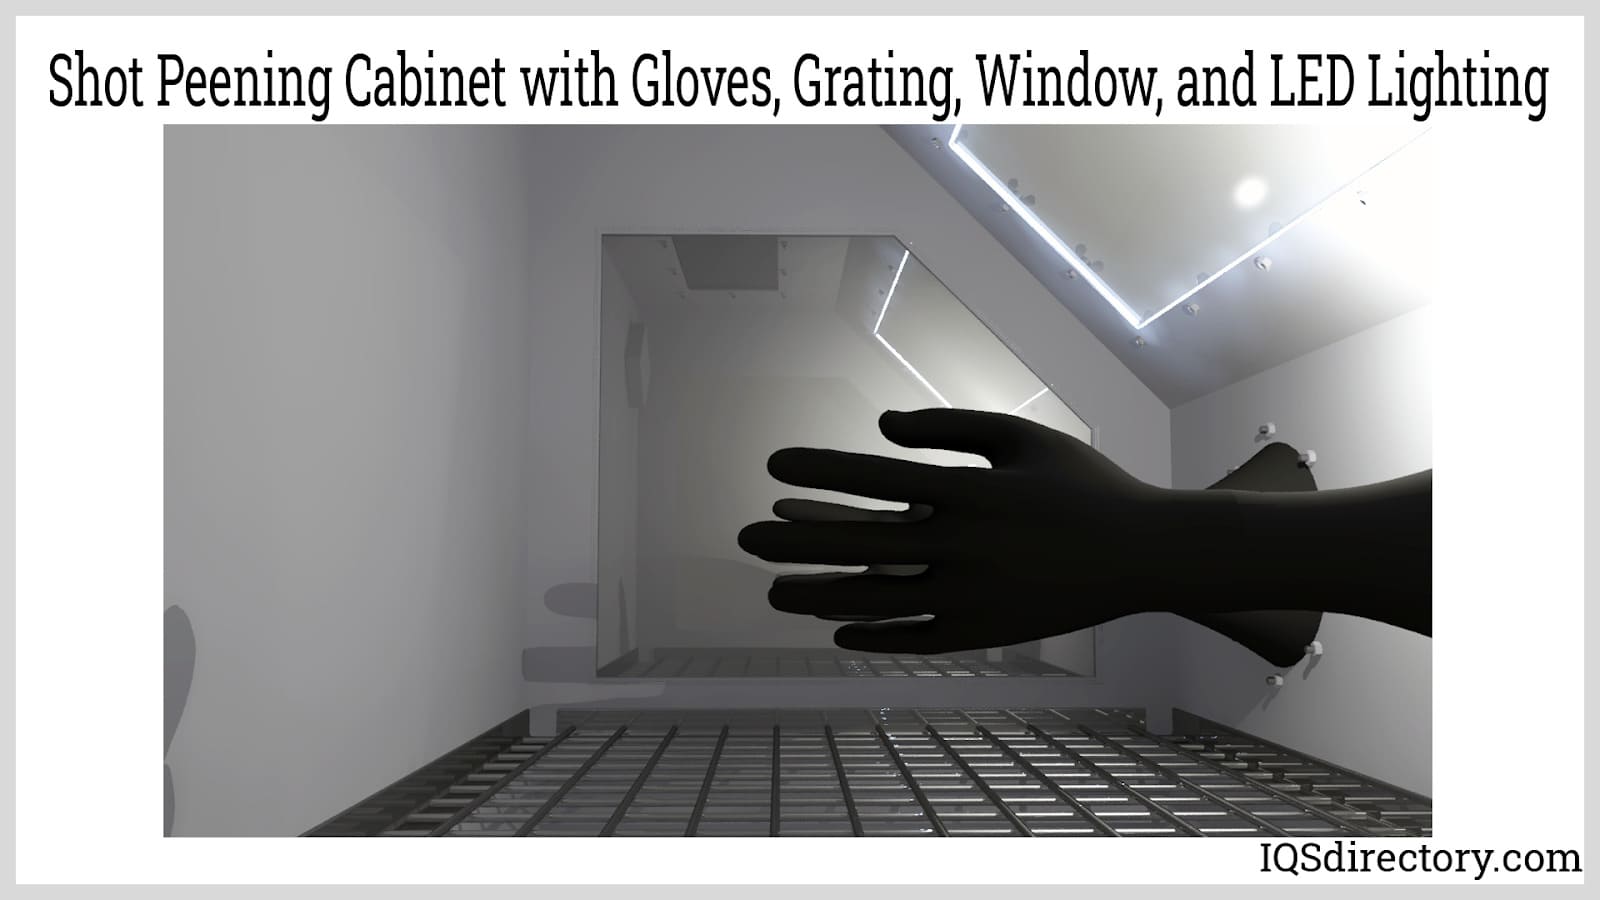 Shot Peening Cabinet with Gloves, Grating, Window, and LED Lighting